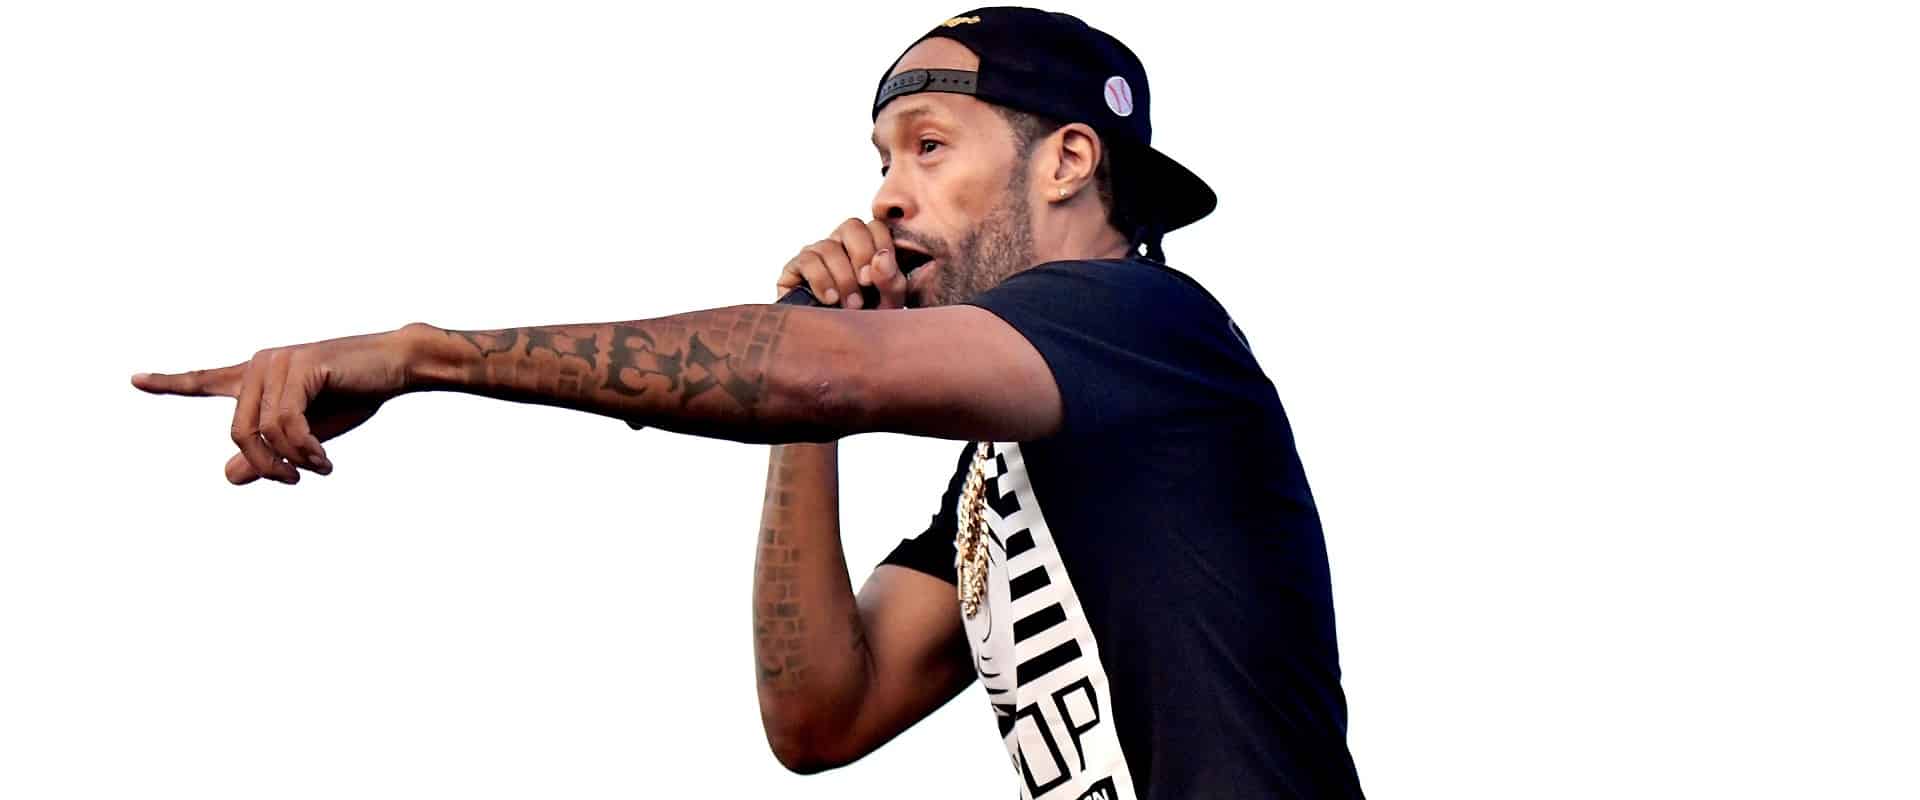 Redman performs onstage during a live concert.